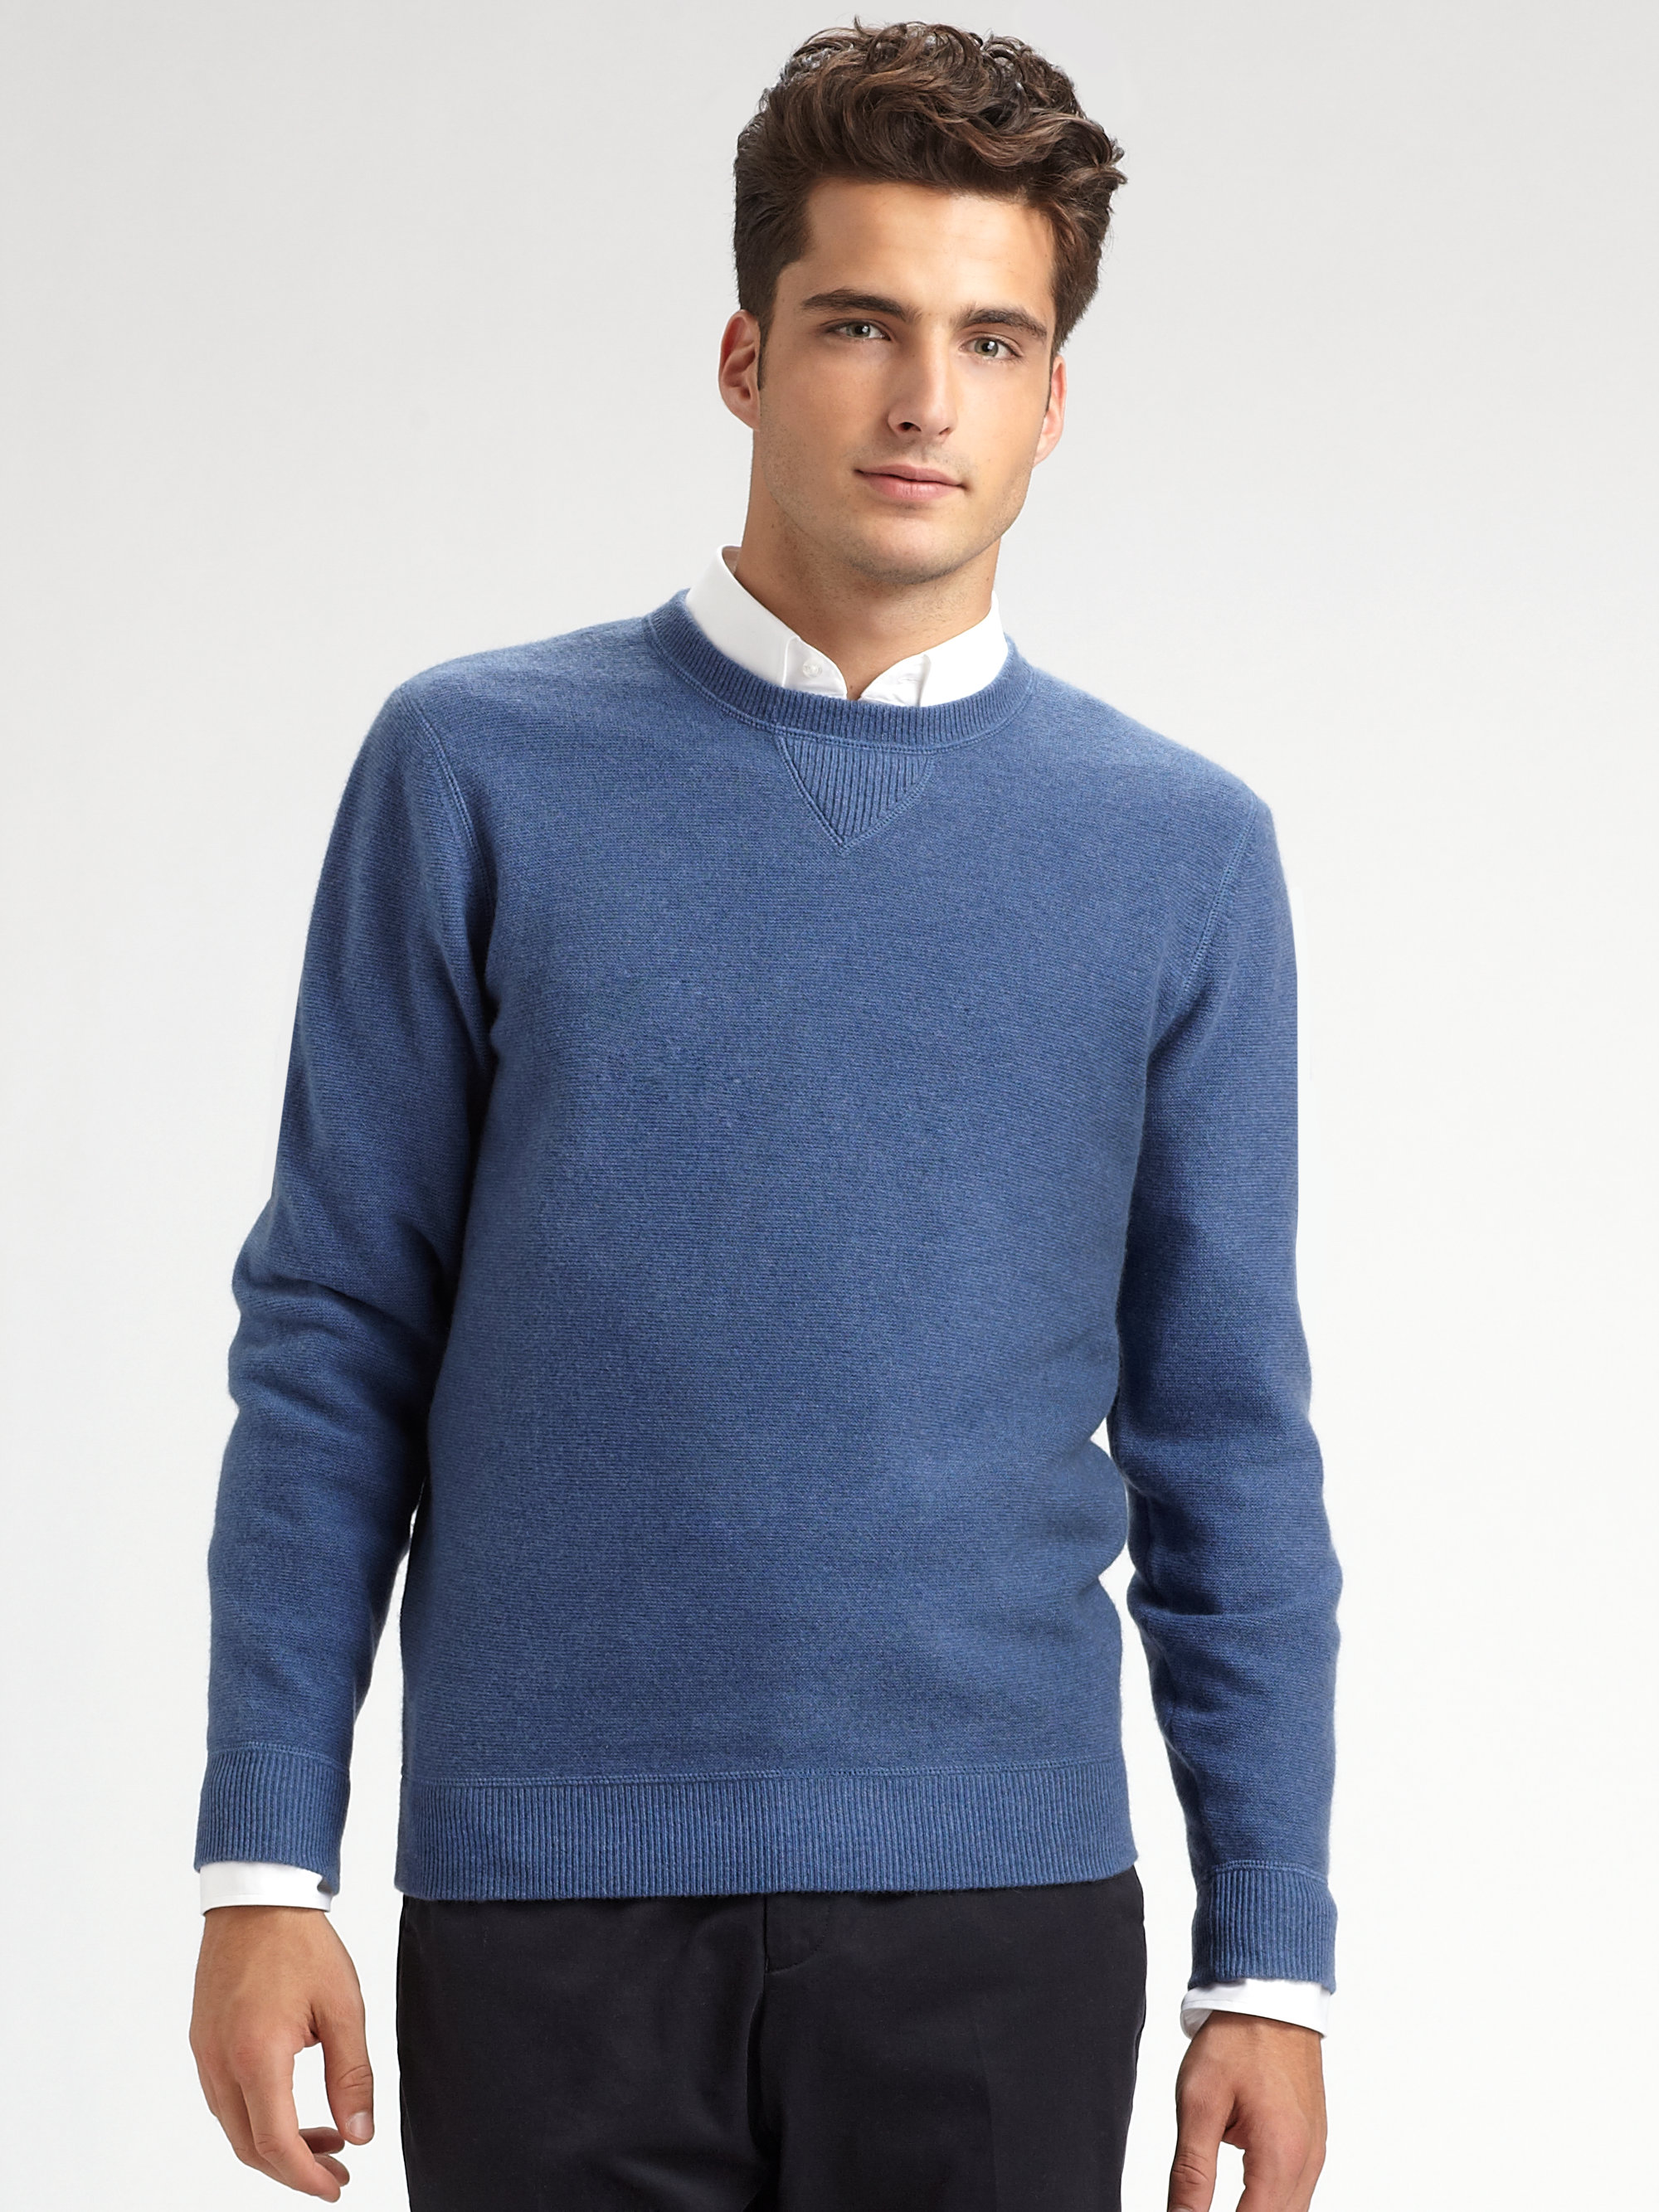 for Men Blue Mens Sweaters and knitwear Saks Fifth Avenue Sweaters and knitwear Saks Fifth Avenue Wool Blend Quarter Zip Sweater in Charcoal 